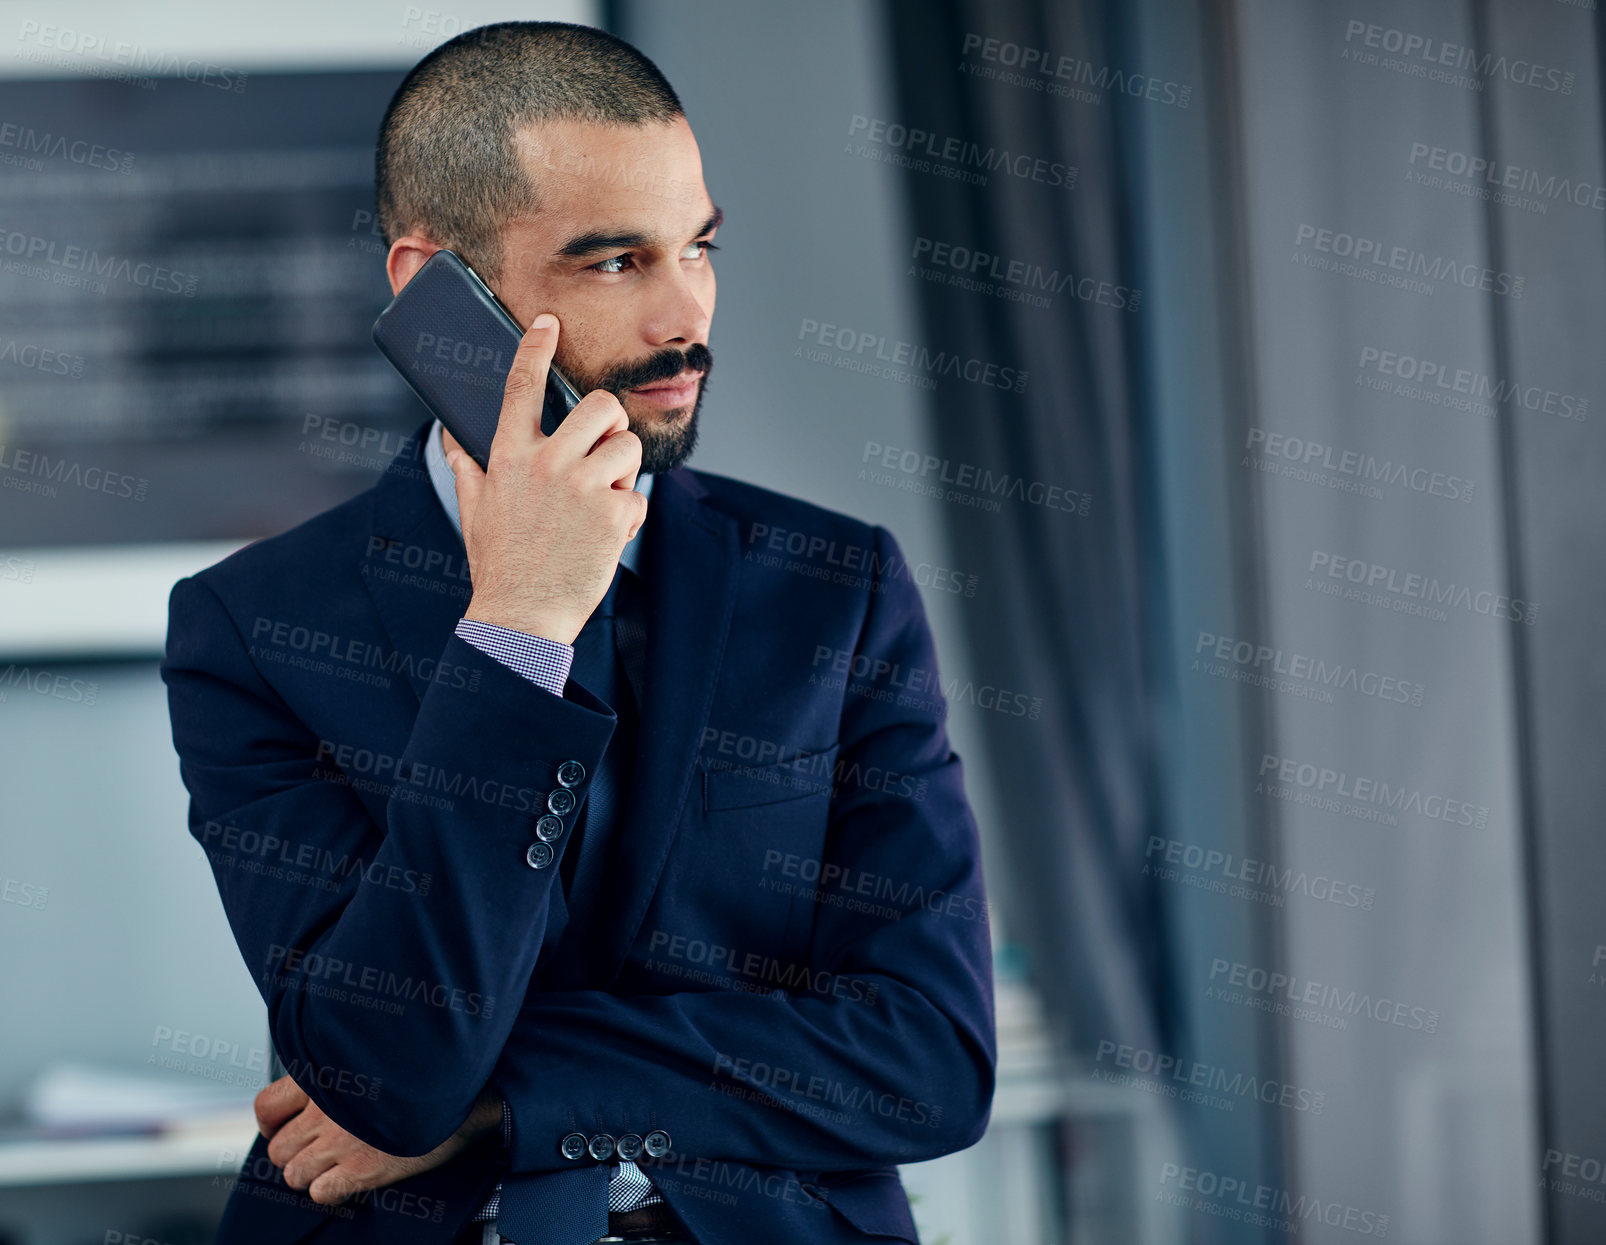 Buy stock photo Shot of a young businessman talking on a cellphone in his office